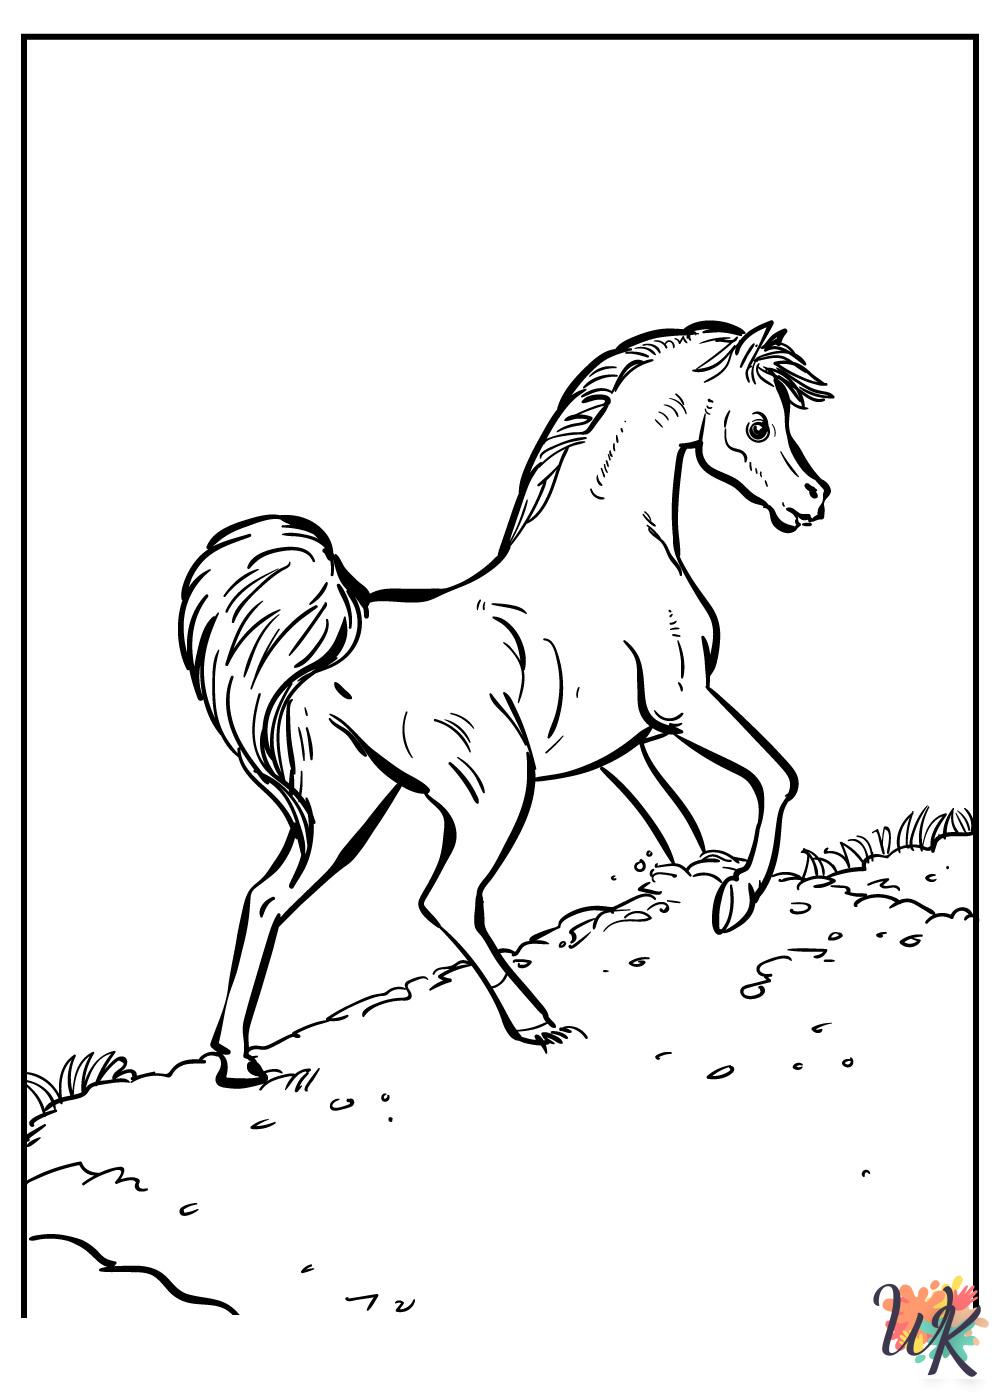 free full size printable Horse coloring pages for adults pdf